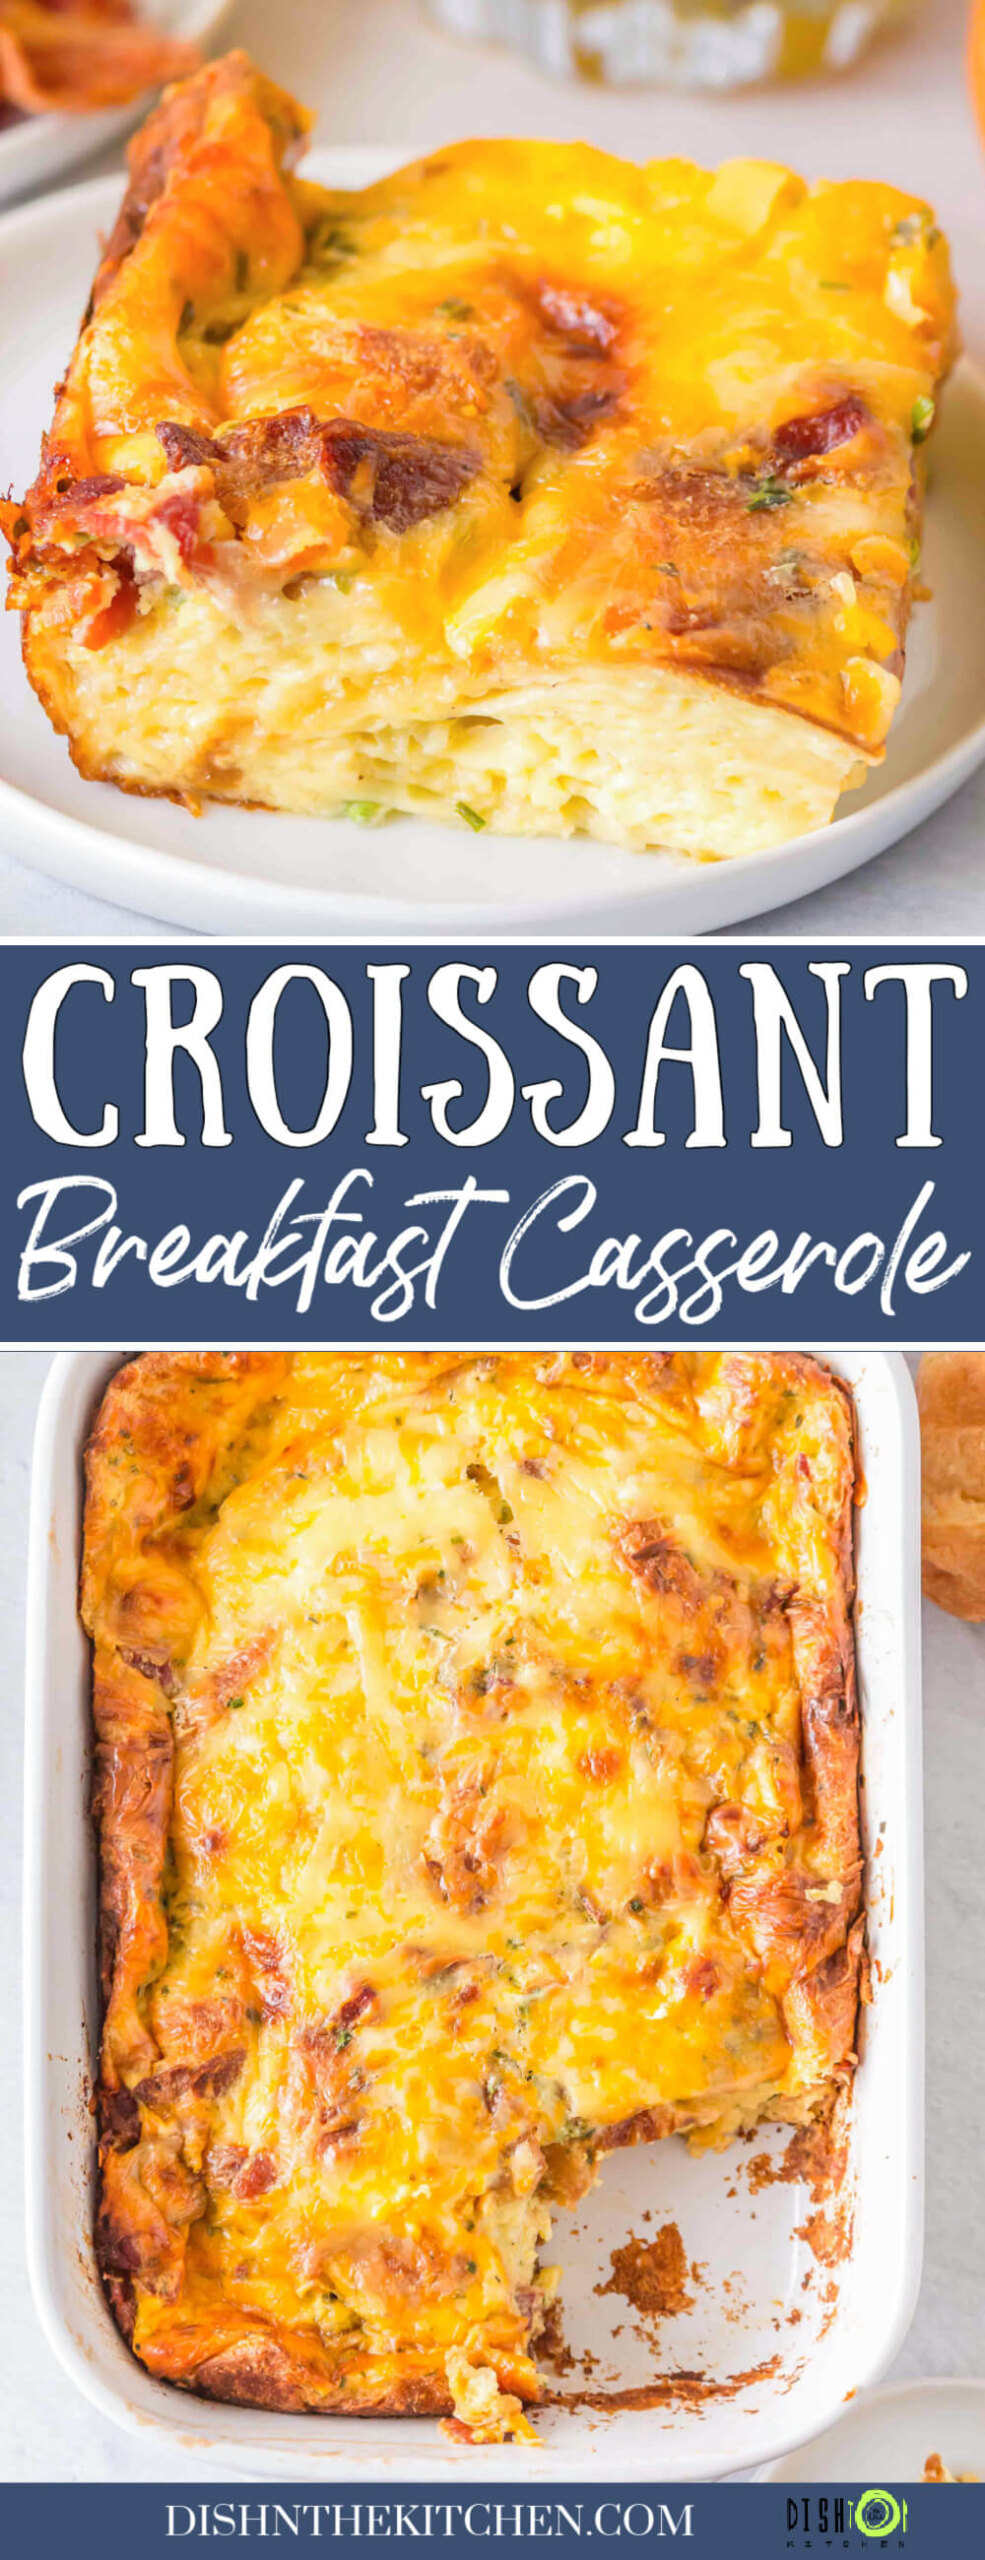 Pinterest photos of a golden baked, cheese topped Croissant Breakfast Casserole in a white baking dish.